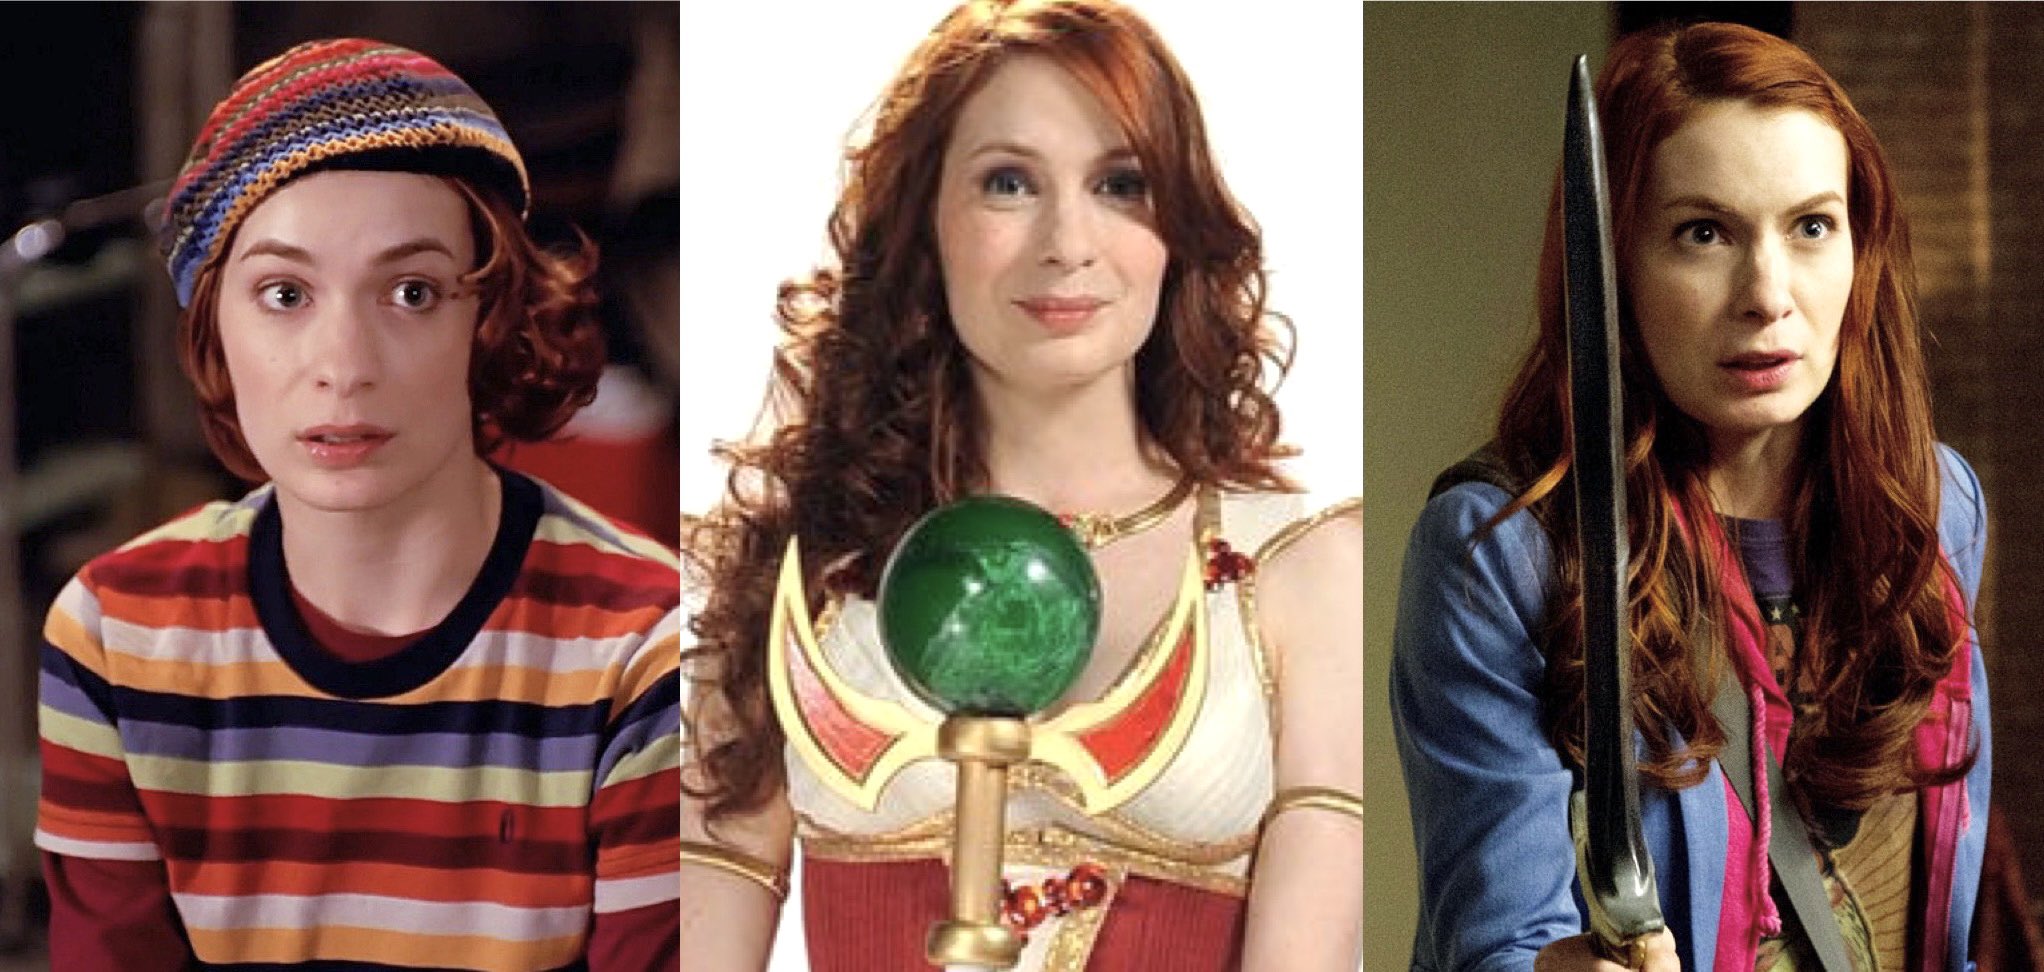  Happy birthday to Felicia Day who was born on June 28, 1979   